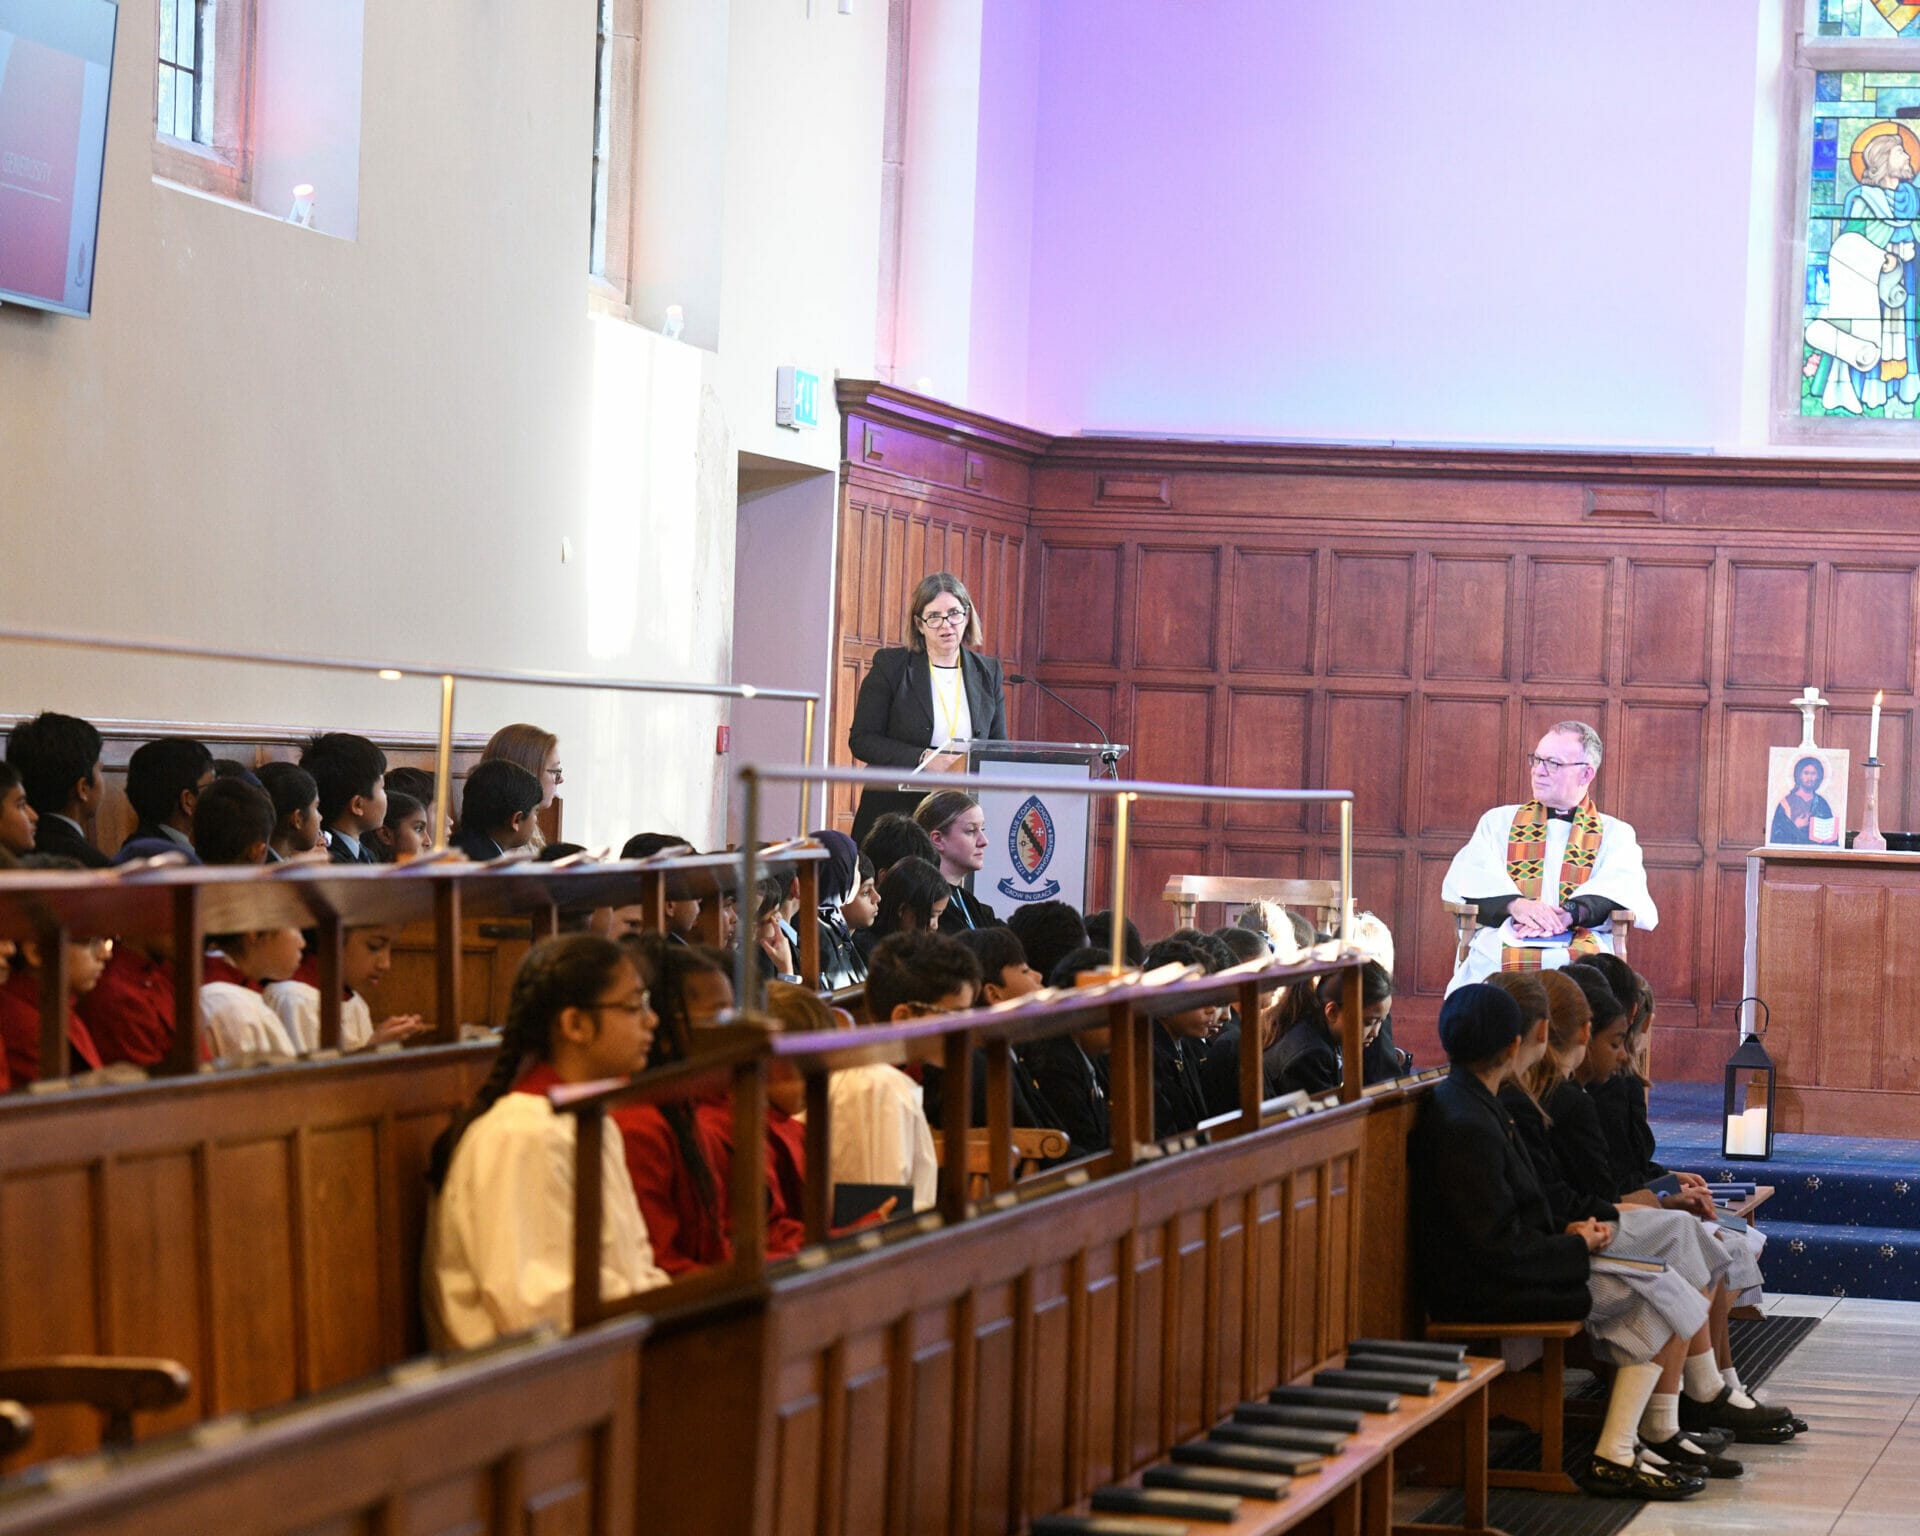 Clare Macro visits The Blue Coat School to deliver a Chapel Service.